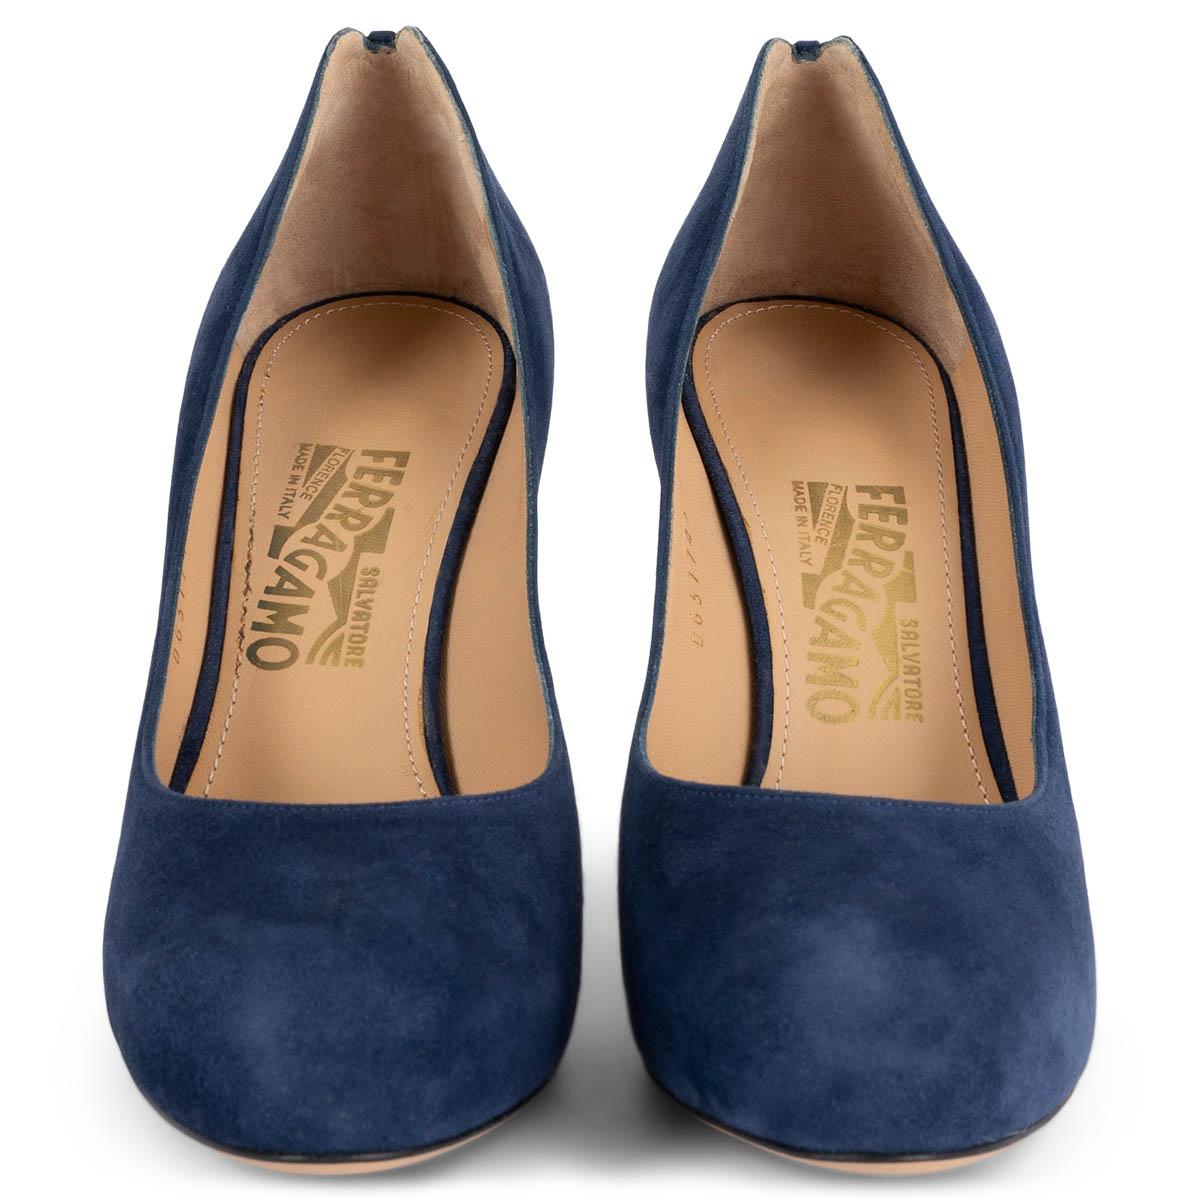 100% authentic Salvatore Ferragamo hidden platform pumps in navy blue suede with a patent leather heel. Have been worn once inside and are in virtually new condition. 

Measurements
Imprinted Size	7.5
Shoe Size	37.5
Inside Sole	24.5cm